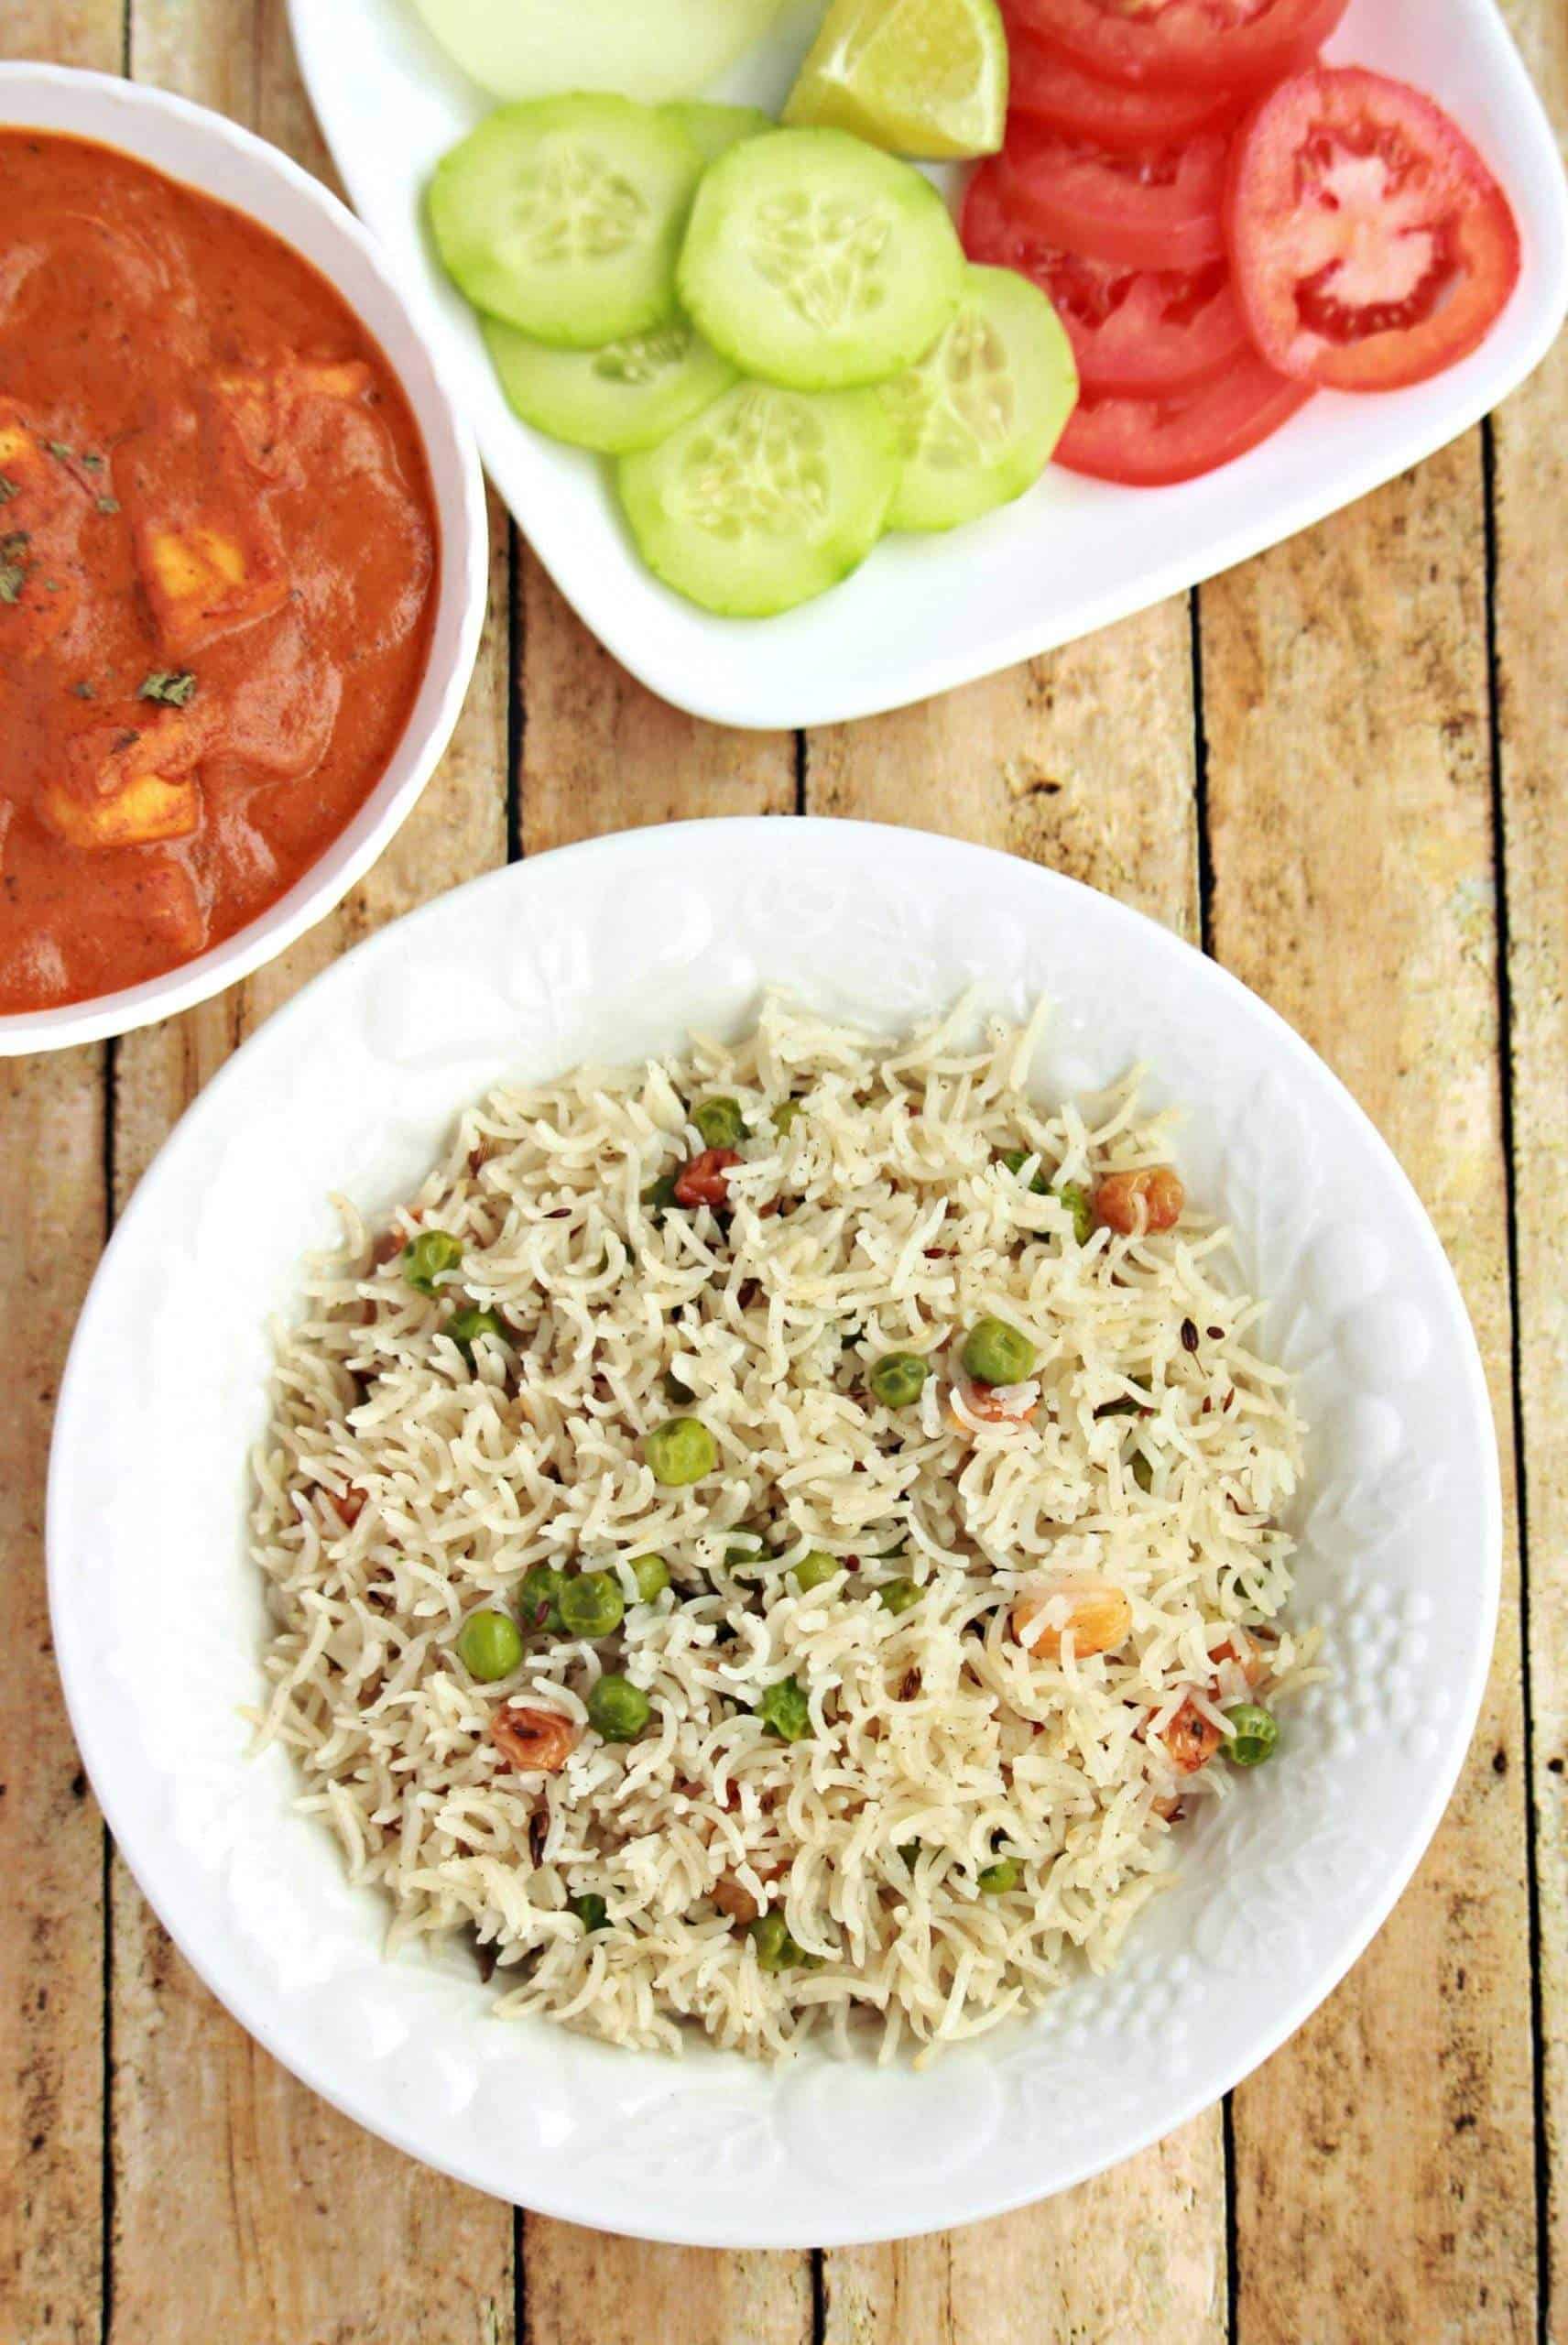 peas pulao in a white bowl with curry and salad on side